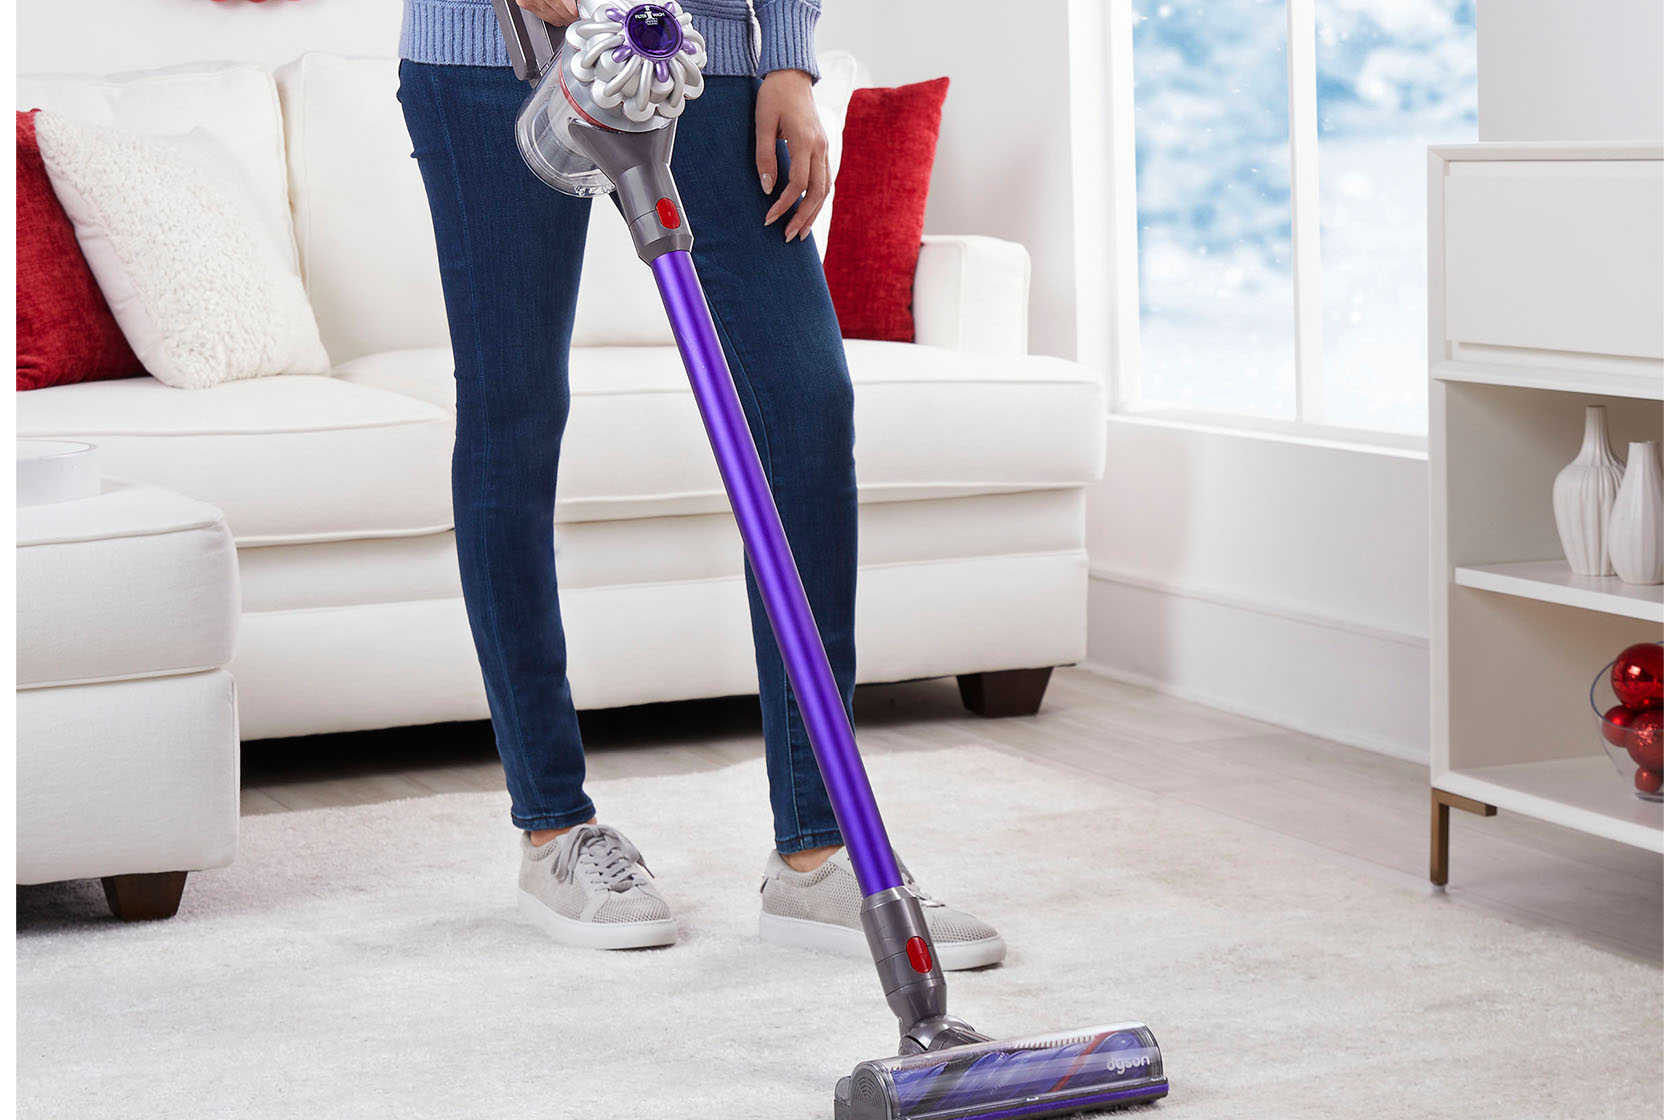 The powerful Dyson V8 Extra vacuum is $120 off and ships for free right now